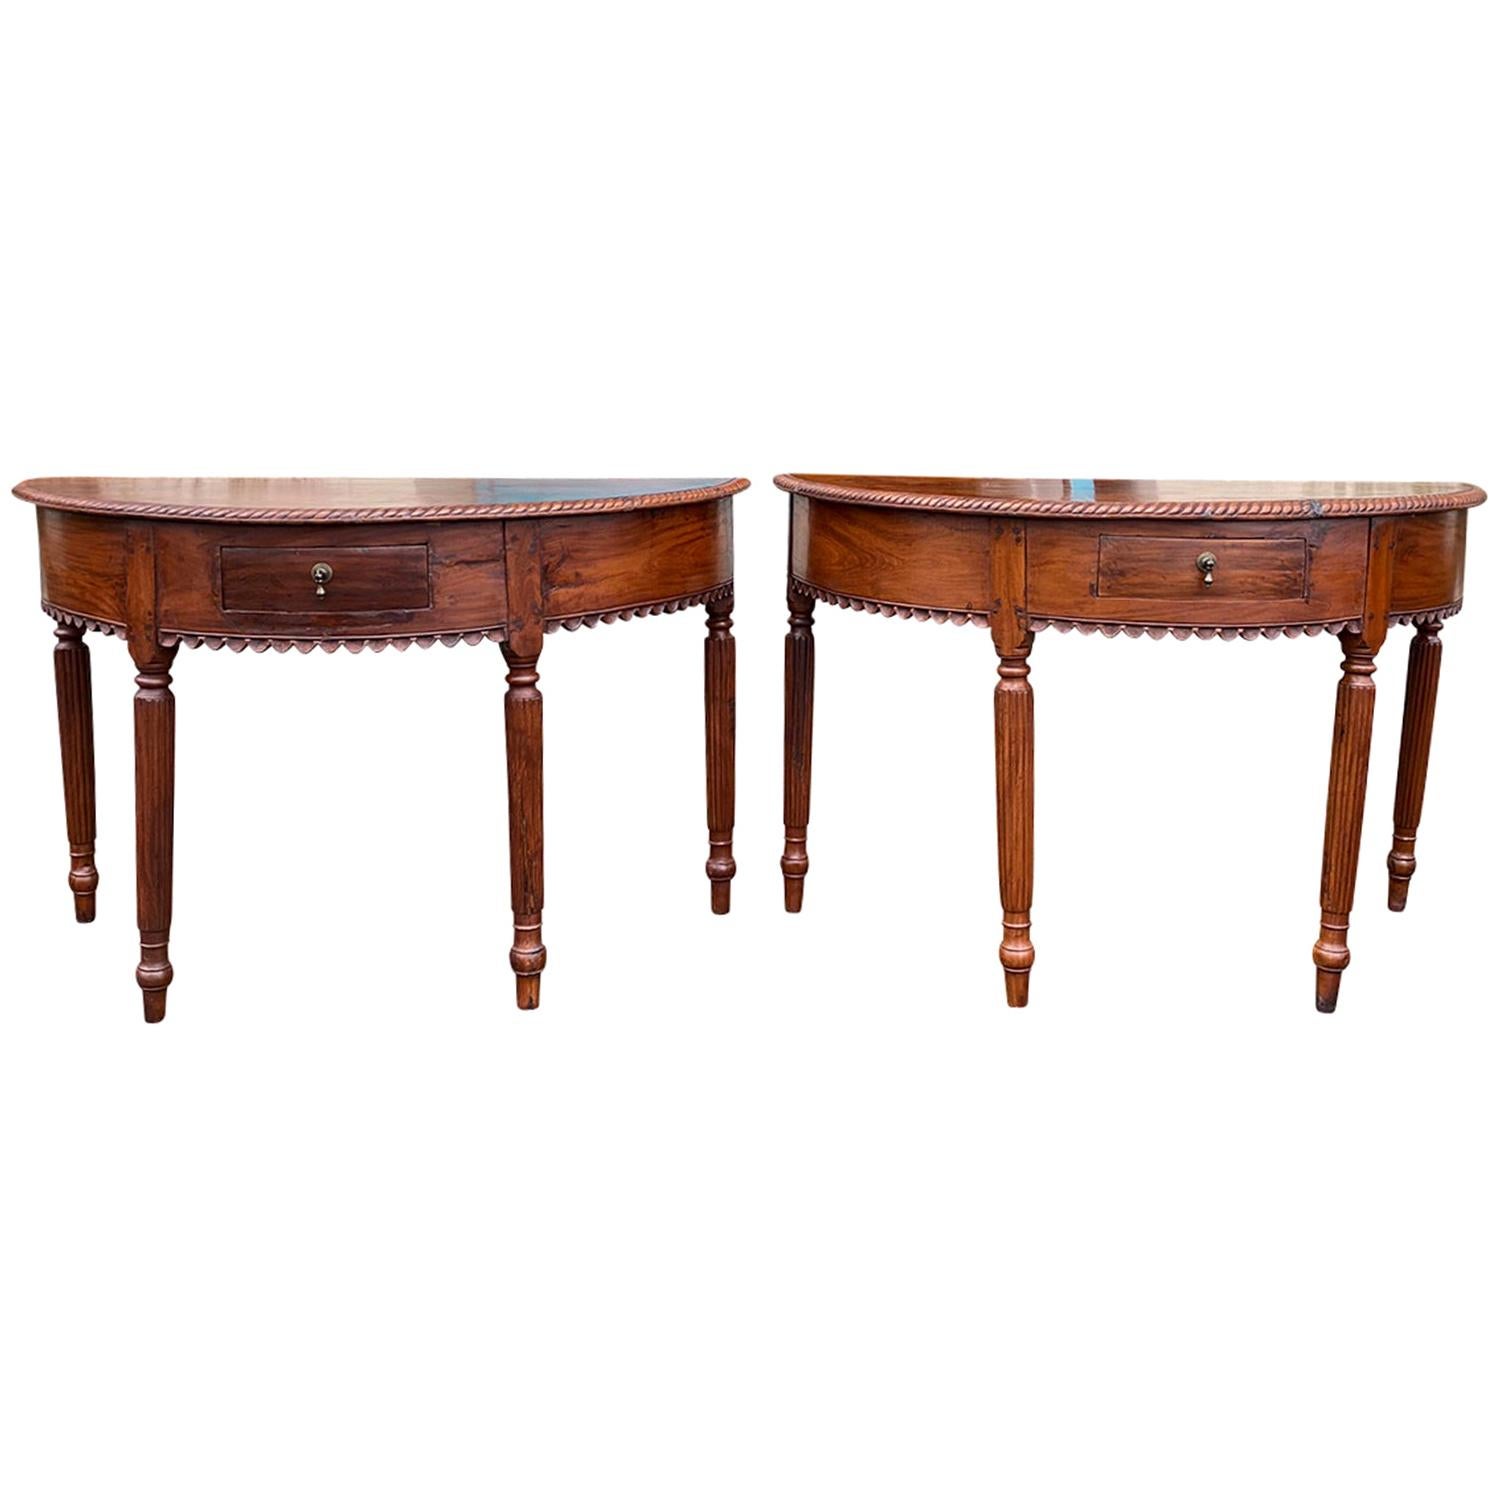 Pair of Anglo-Indian or Anglo-Caribbean Carved Demilune Console Tables